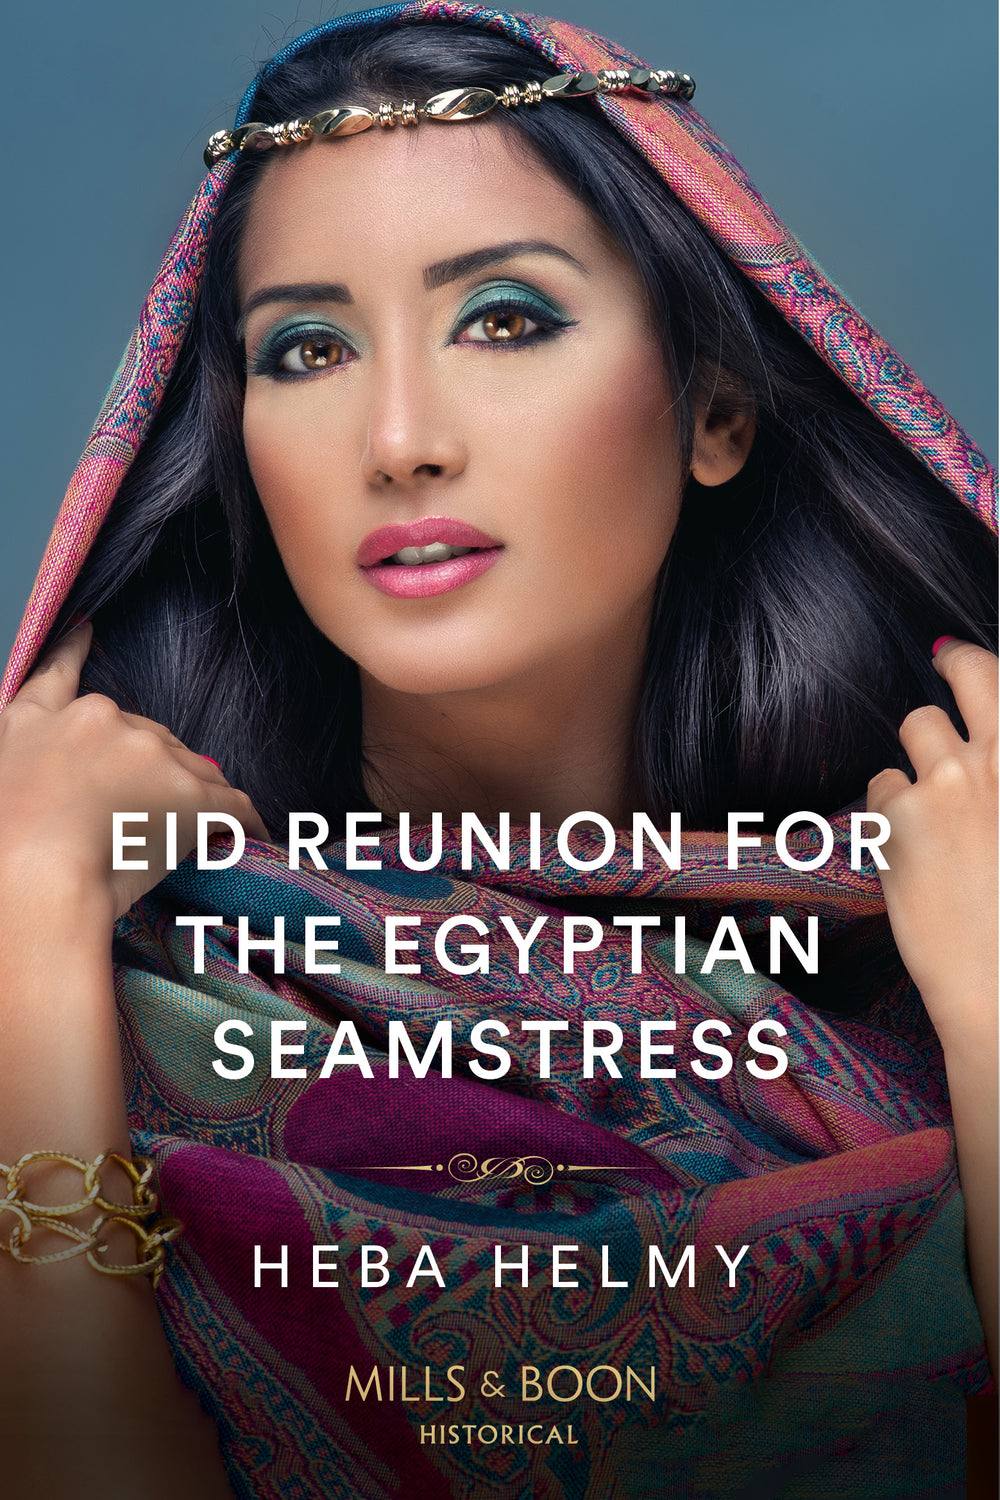 Eid Reunion for the Egyptian Seamstress